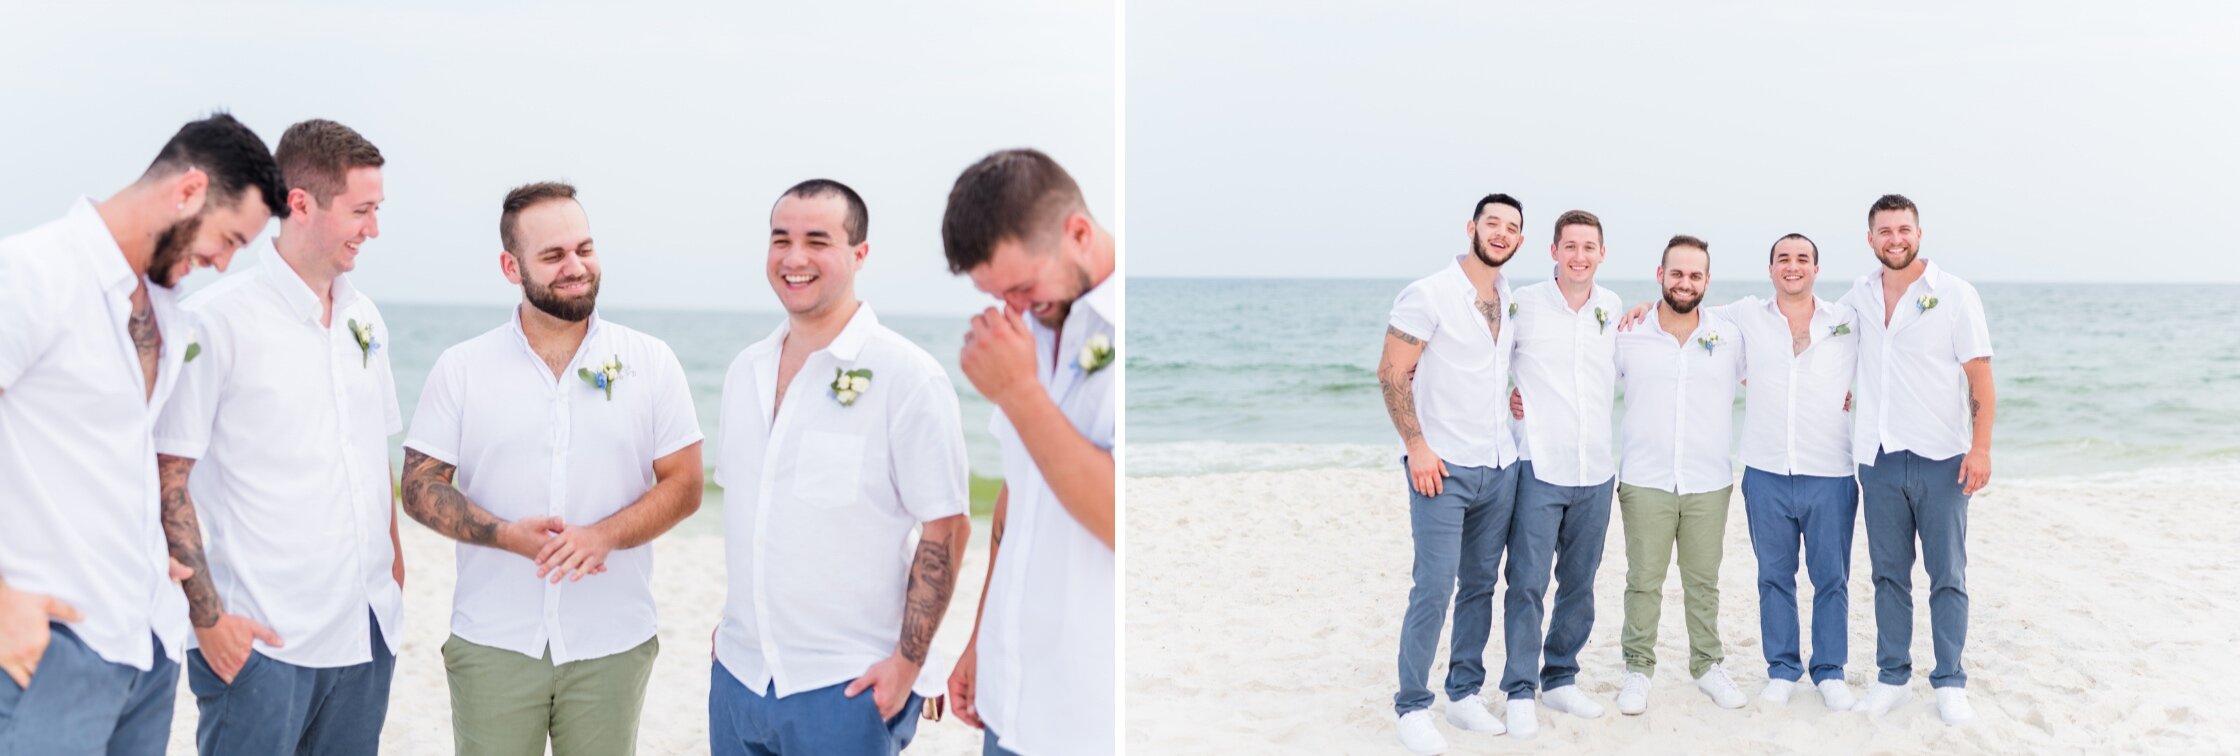 July Orange Beach Wedding Bridal Party Portraits Photographed by Kristen Marcus Photography